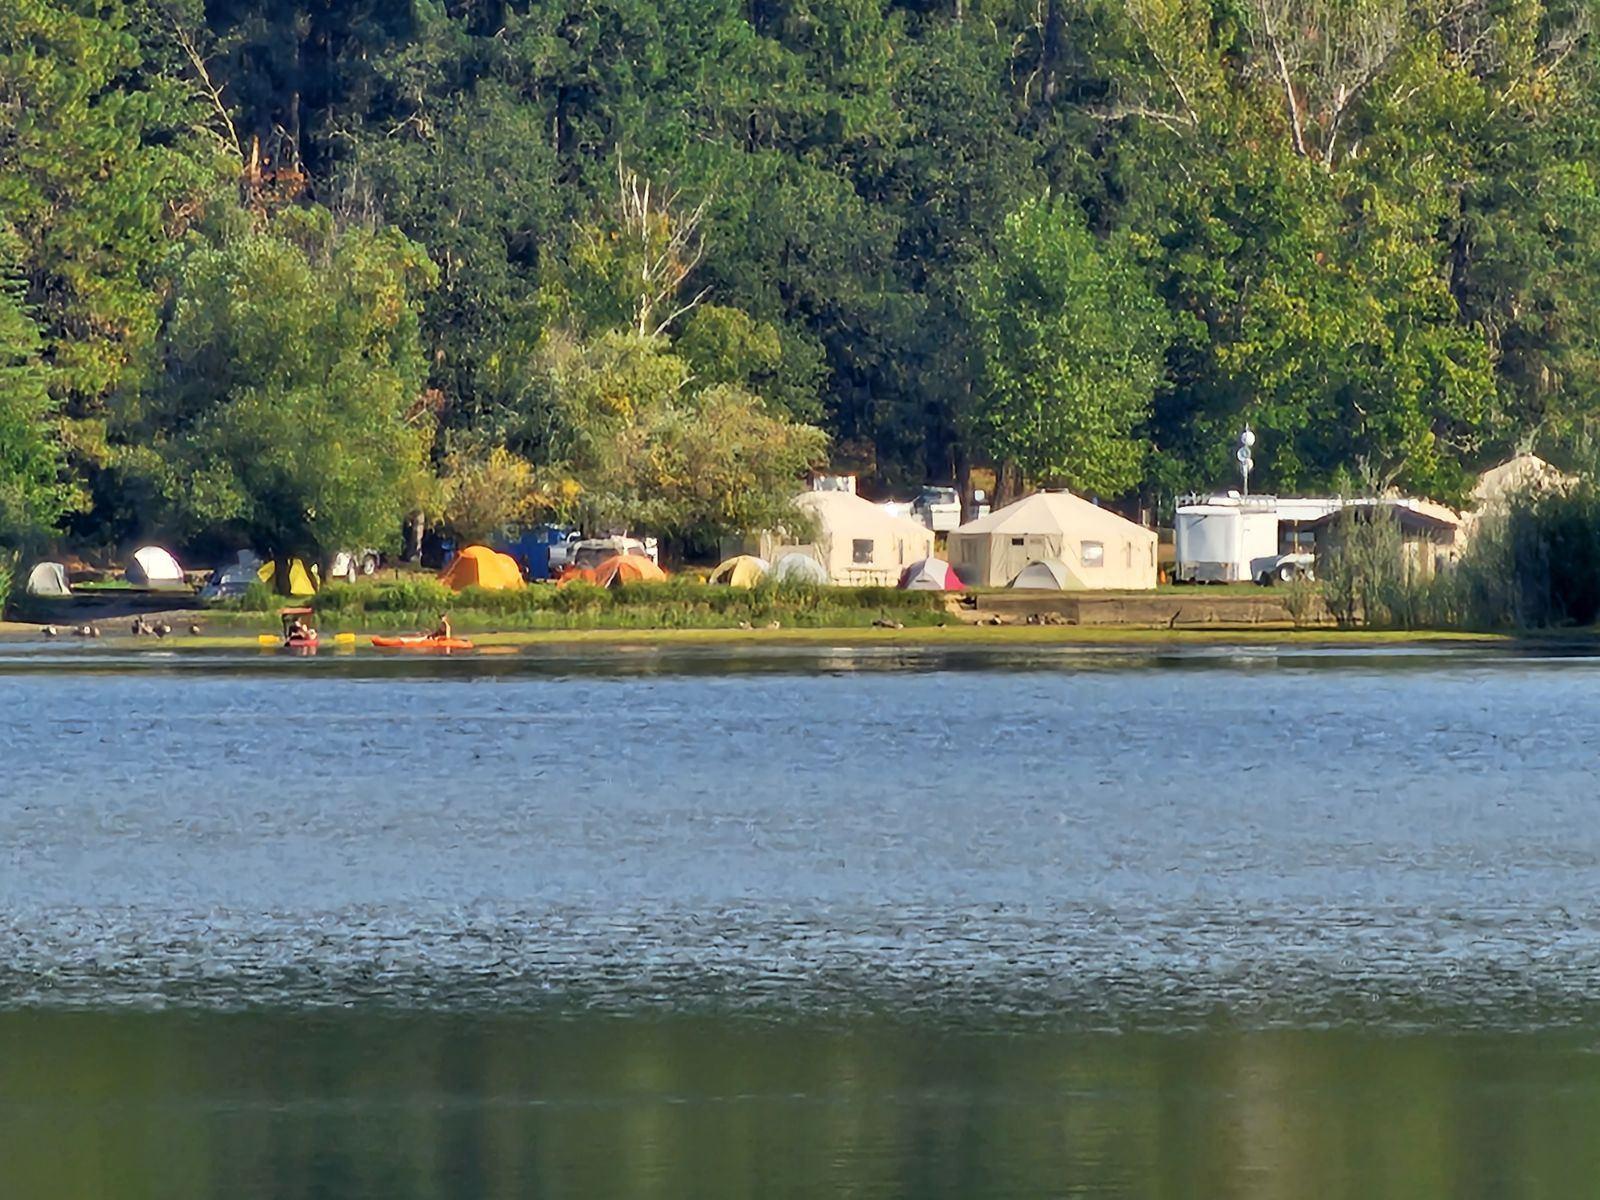 View across a lake of a collection of yurts making up the incident command post for the Smith River Complex.